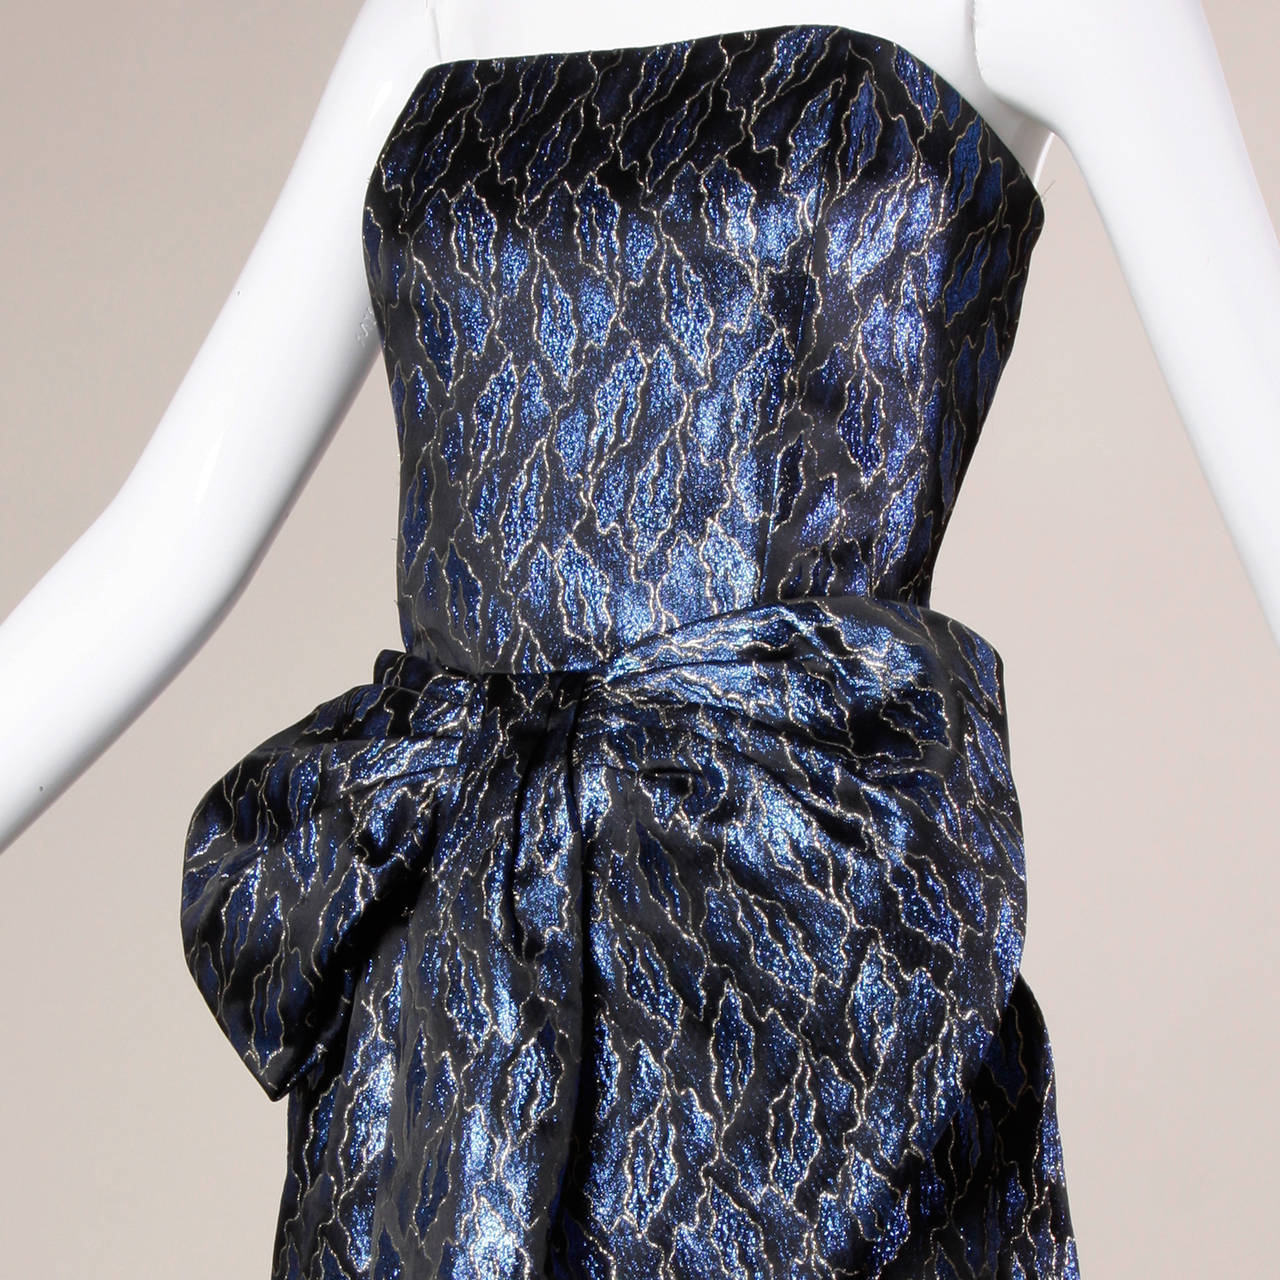 Reduced from $600. Vintage blue and black metallic brocade strapless gown with an origami bow fold at the waist. By Victor Costa.

Details:

Partially Lined
Back Zip and Hook Closure
Marked Size: 14
Estimated Size: M-L
Color: Metallic